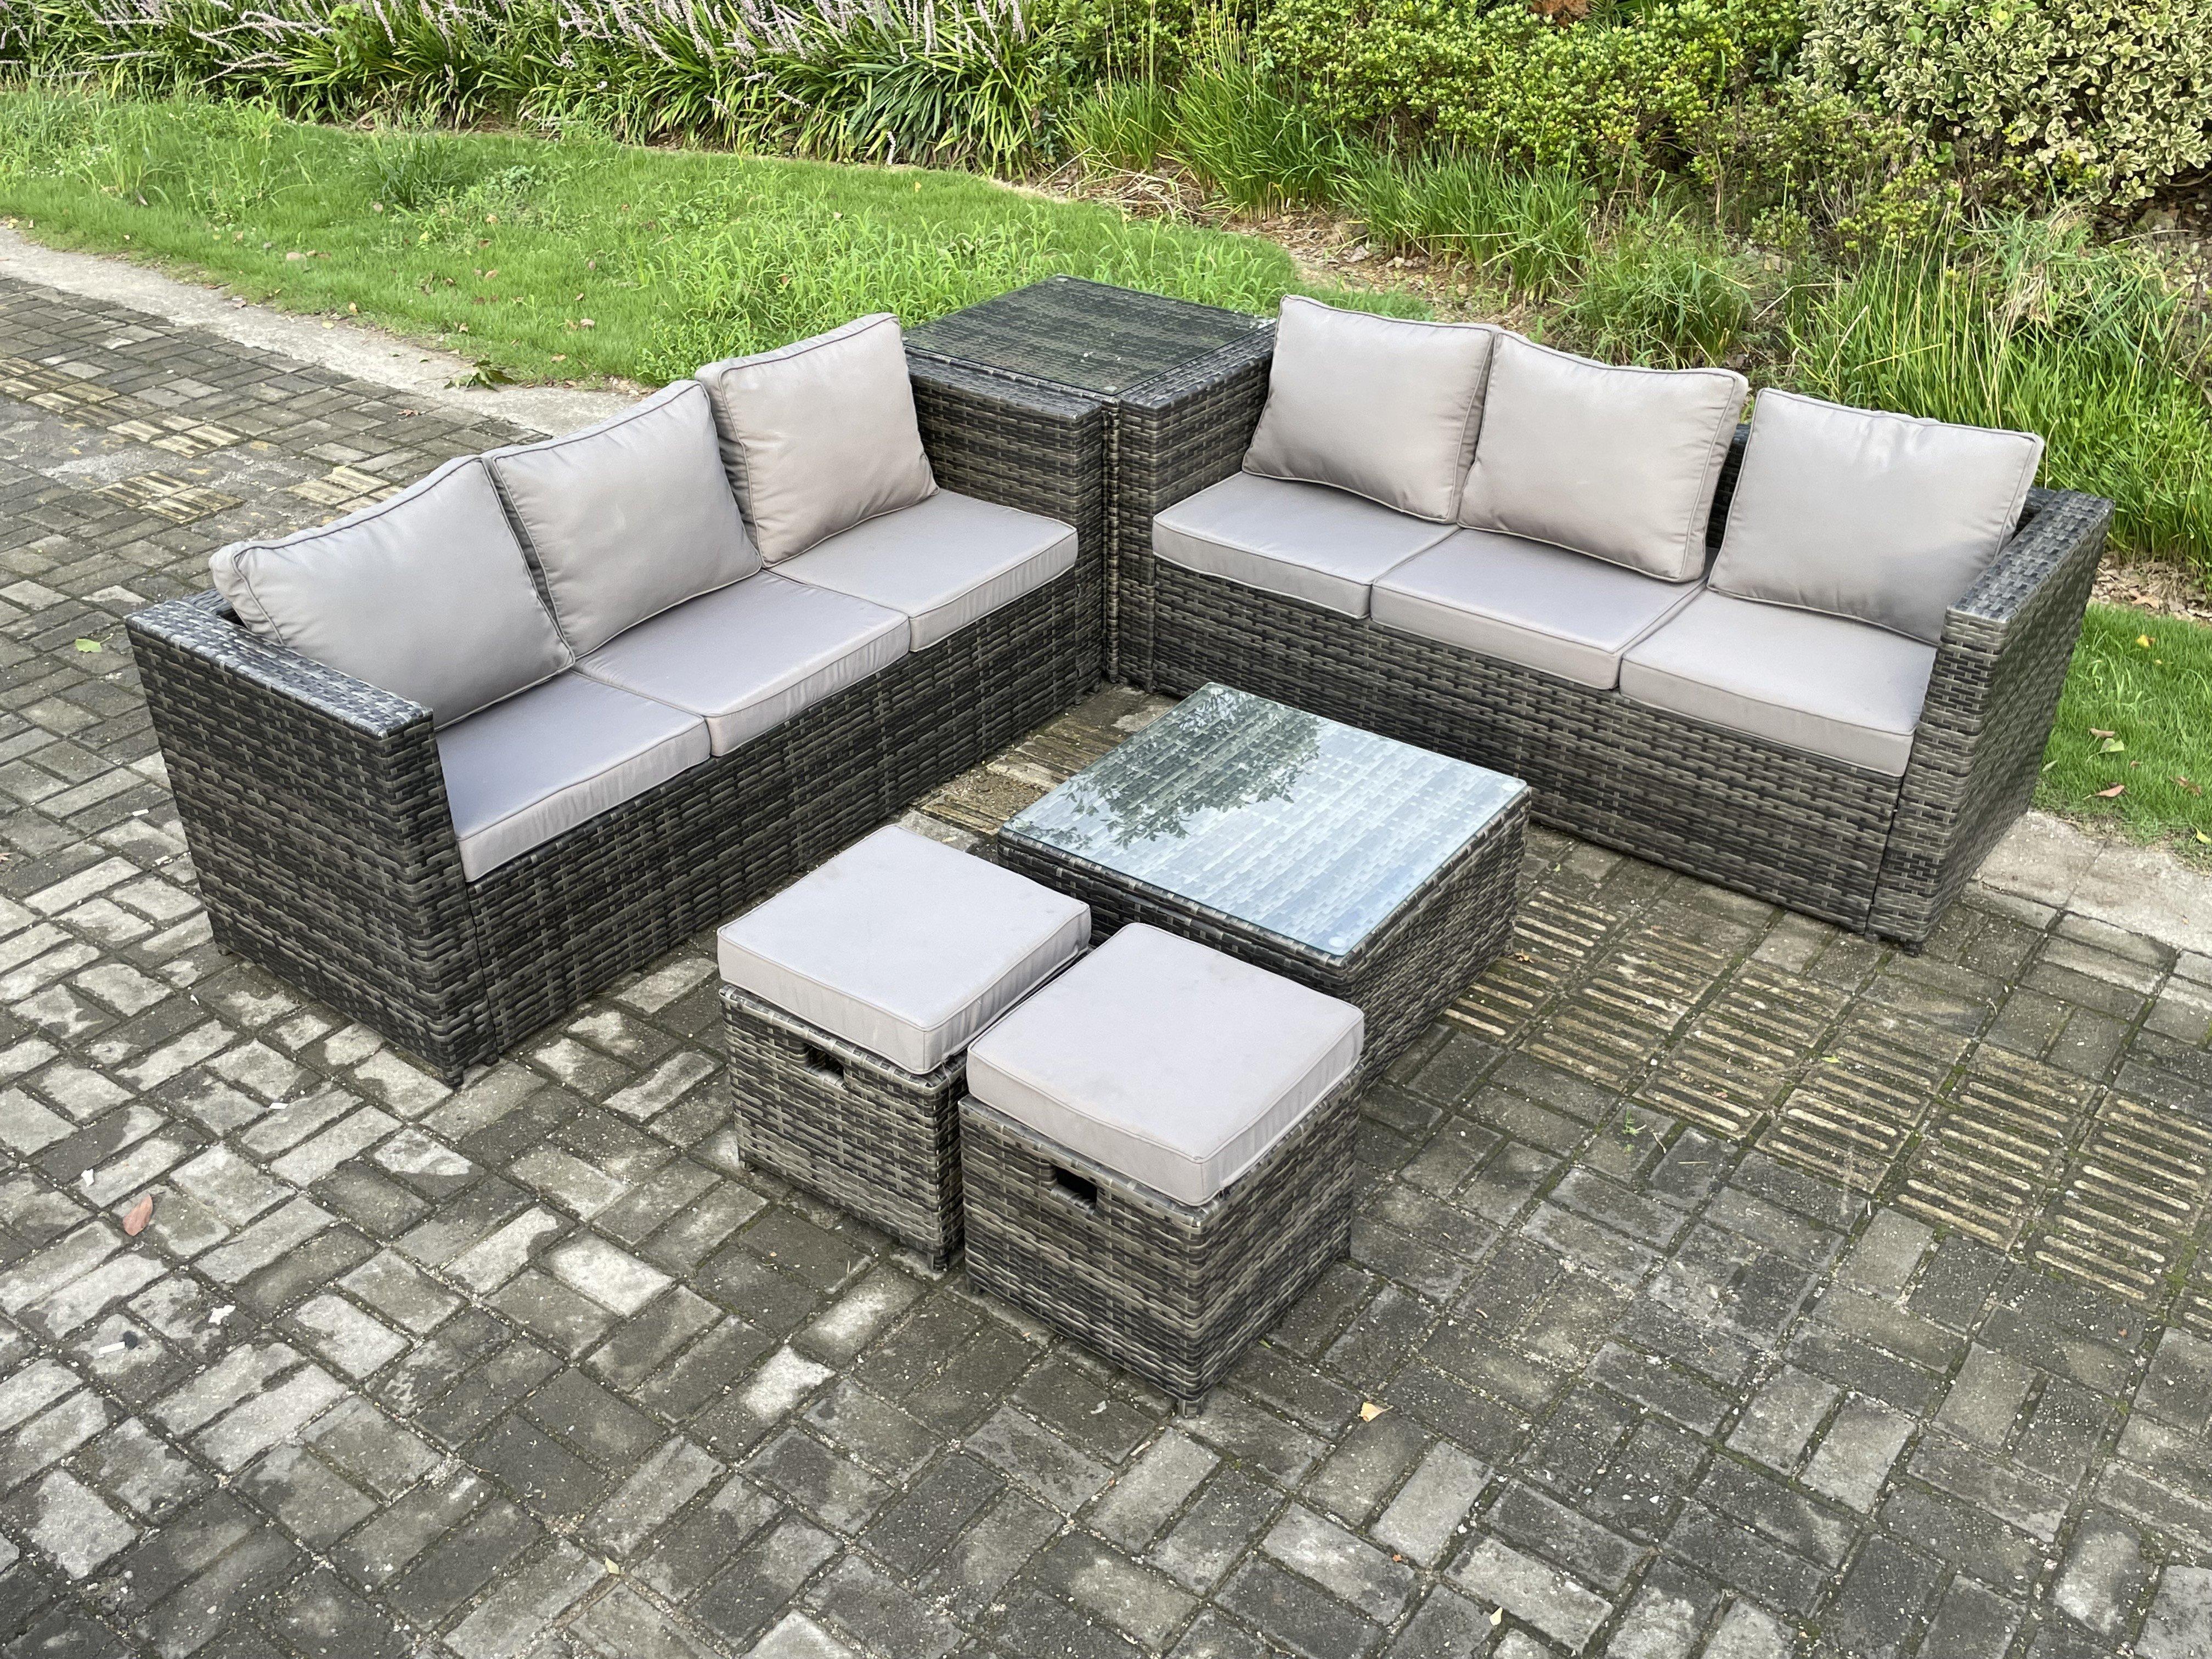 8 Seater Rattan Garden Furniture Sofa Set with Side Table Square Coffee Table 2 Small Footstool Dark